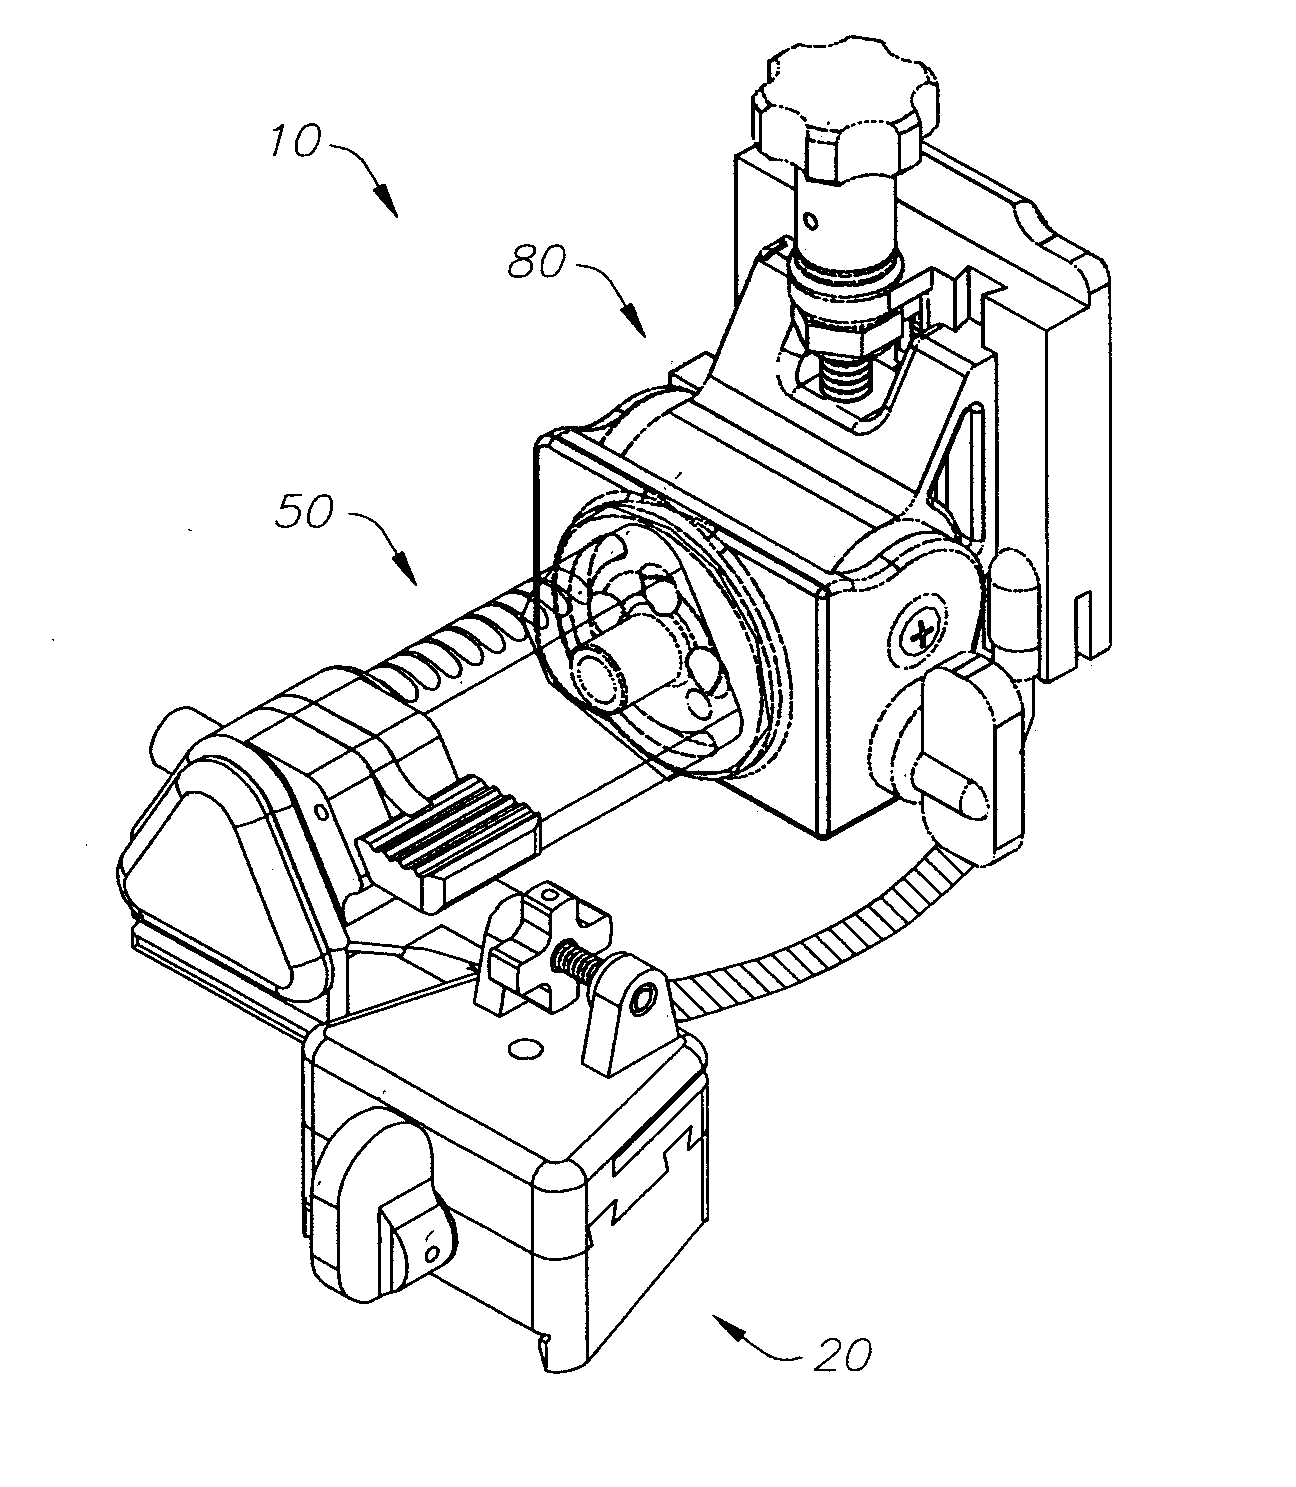 Monorail mount for enhanced night vision goggles